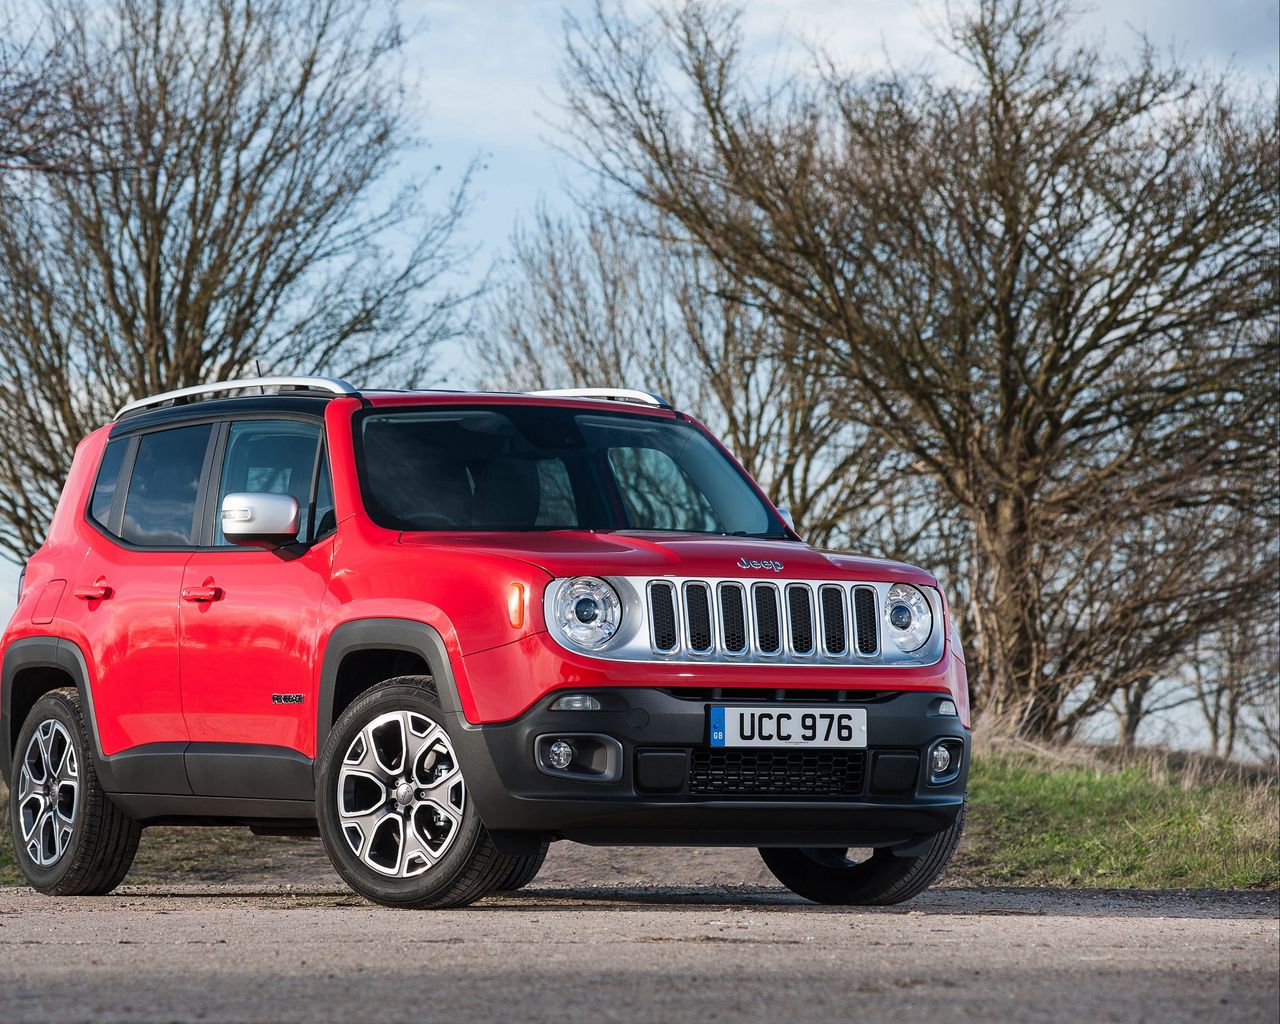 Download wallpaper 1280x1024 jeep renegade limited uk spec red